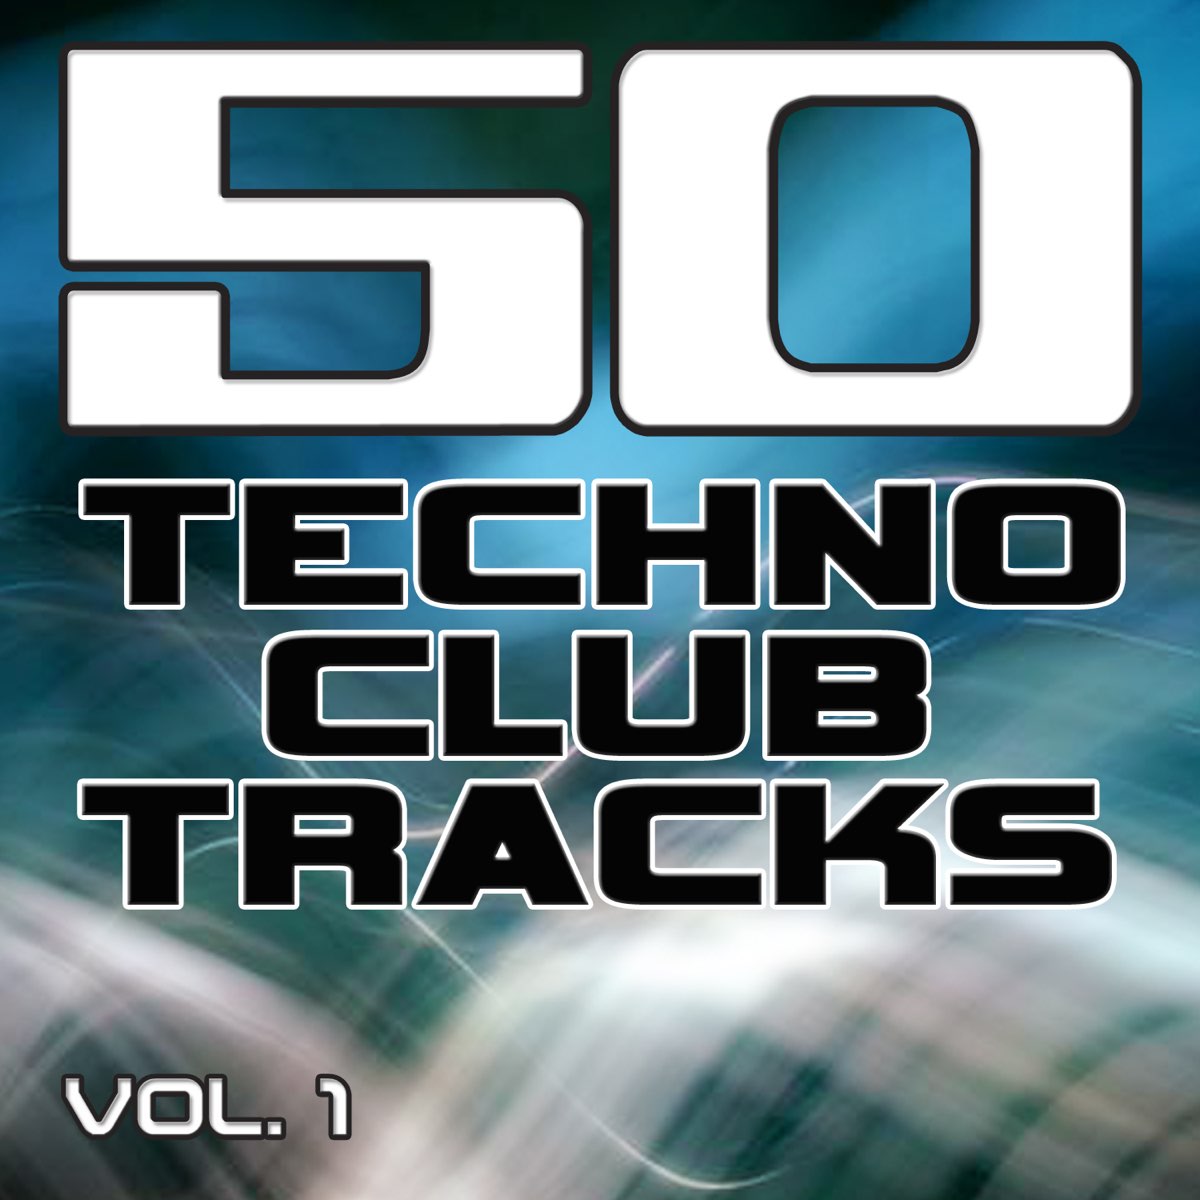 ‎50 Techno Club Tracks Vol. 1 - Best of Techno, Electro House, Trance &  Hands Up by Various Artists on Apple Music